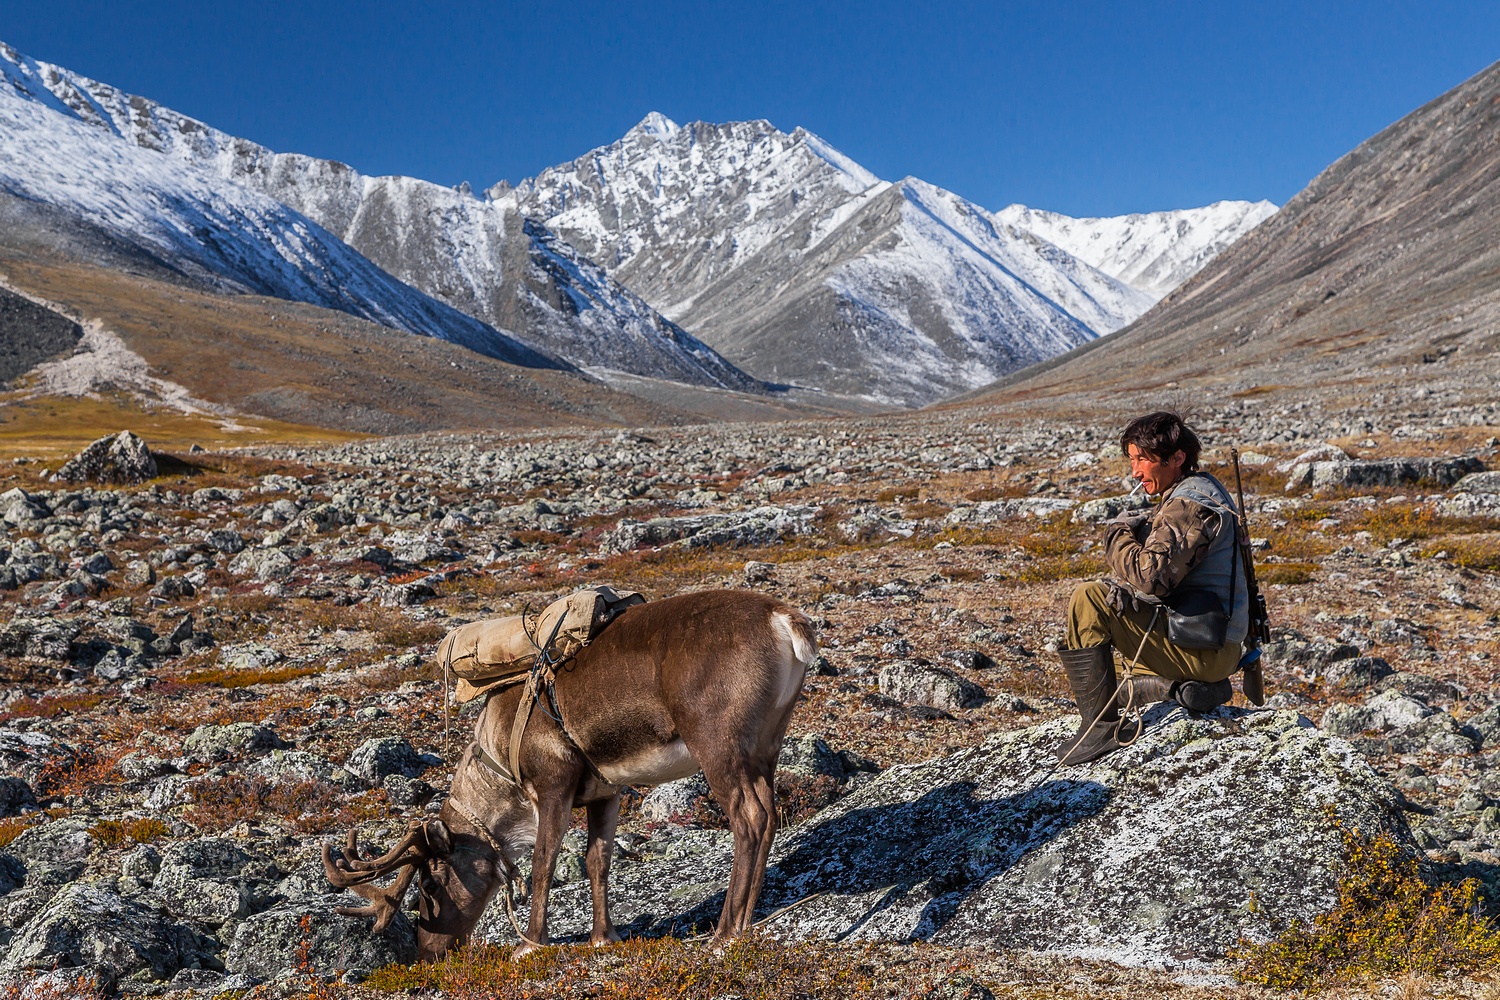 “With the advance of technological progress, life for reindeer herders has not only not improved but has sometimes become even worse. The situation is the most acute at reindeer farms in the north of the Russian Far East, especially in Yakutia.”